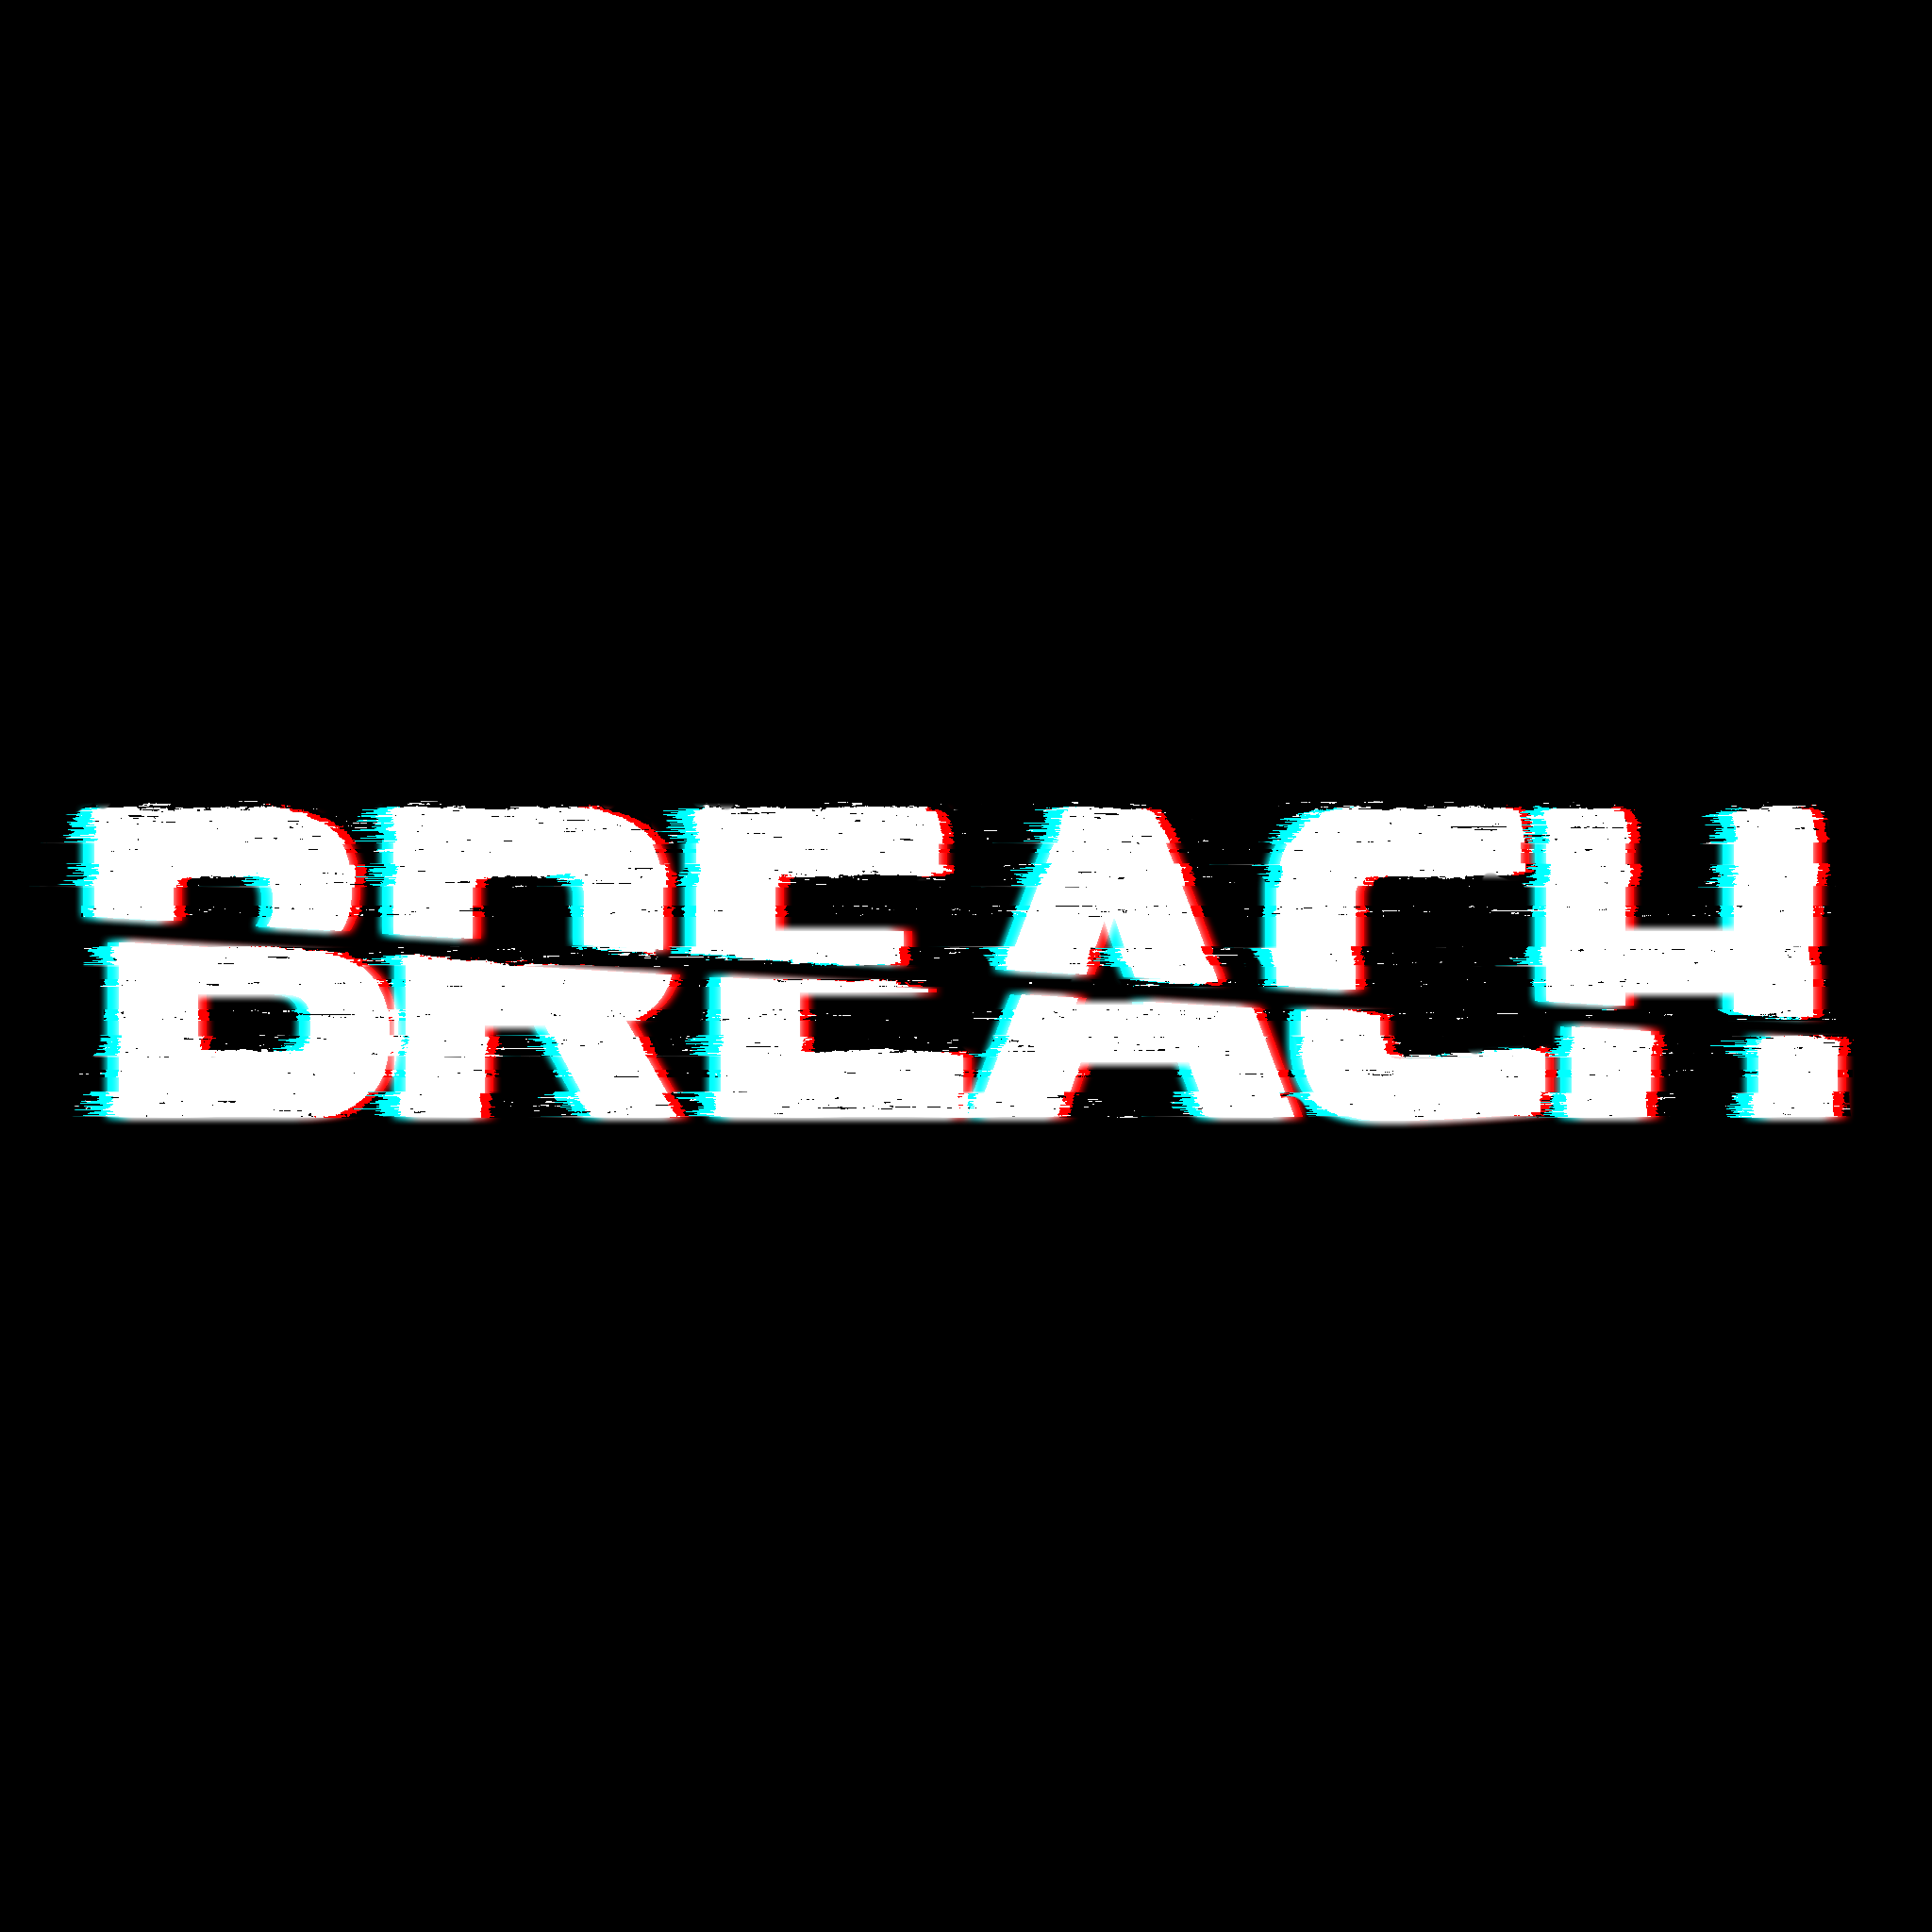 download into the breach switch